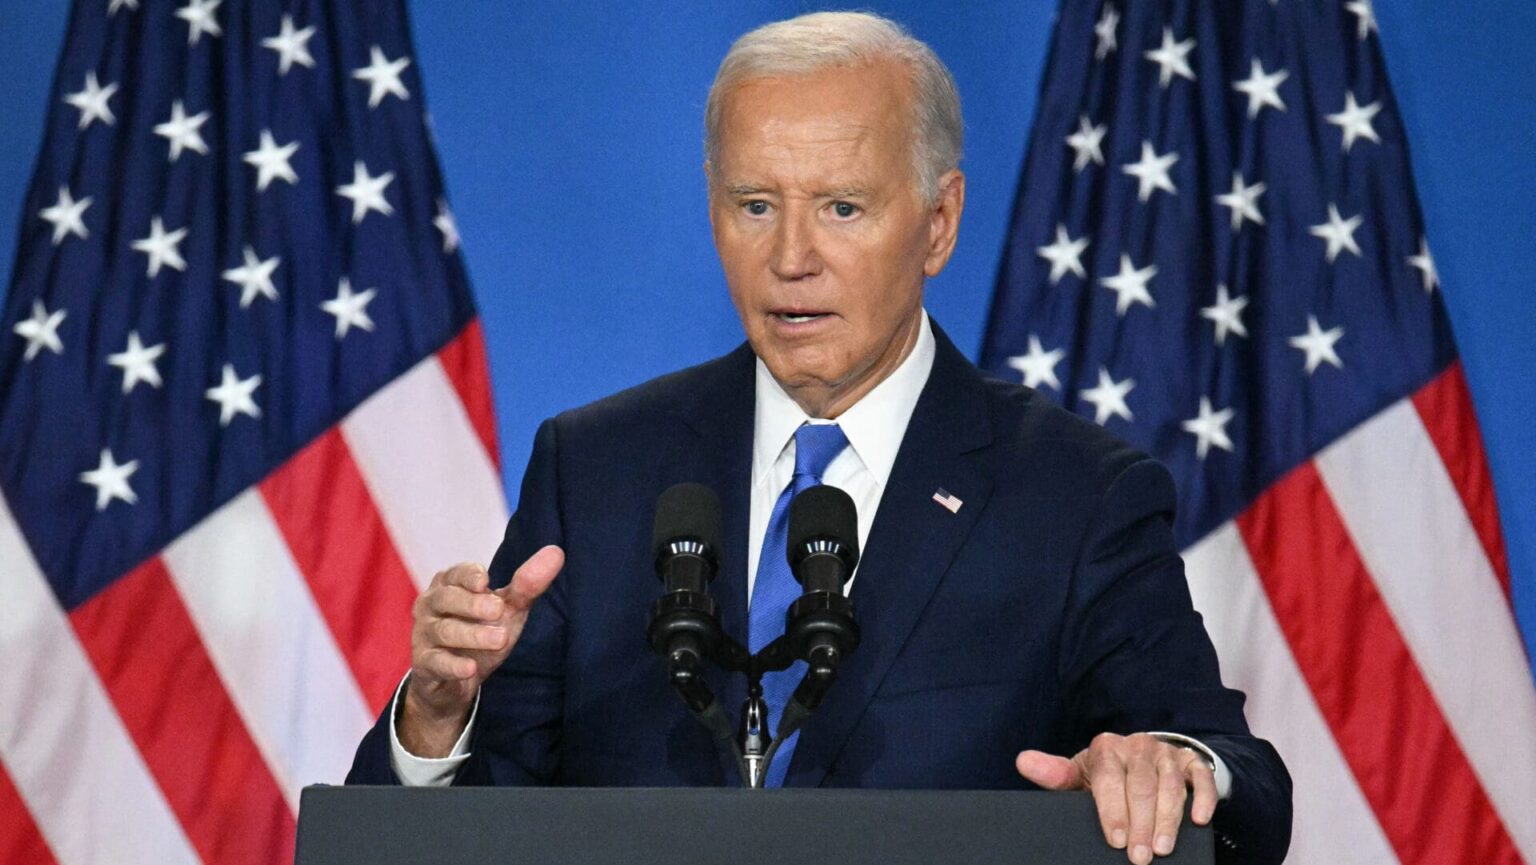 Not Much of a ‘Big Boy’ — Biden Fumbles through Crucial NATO Press Conference, His Future Is in Doubt